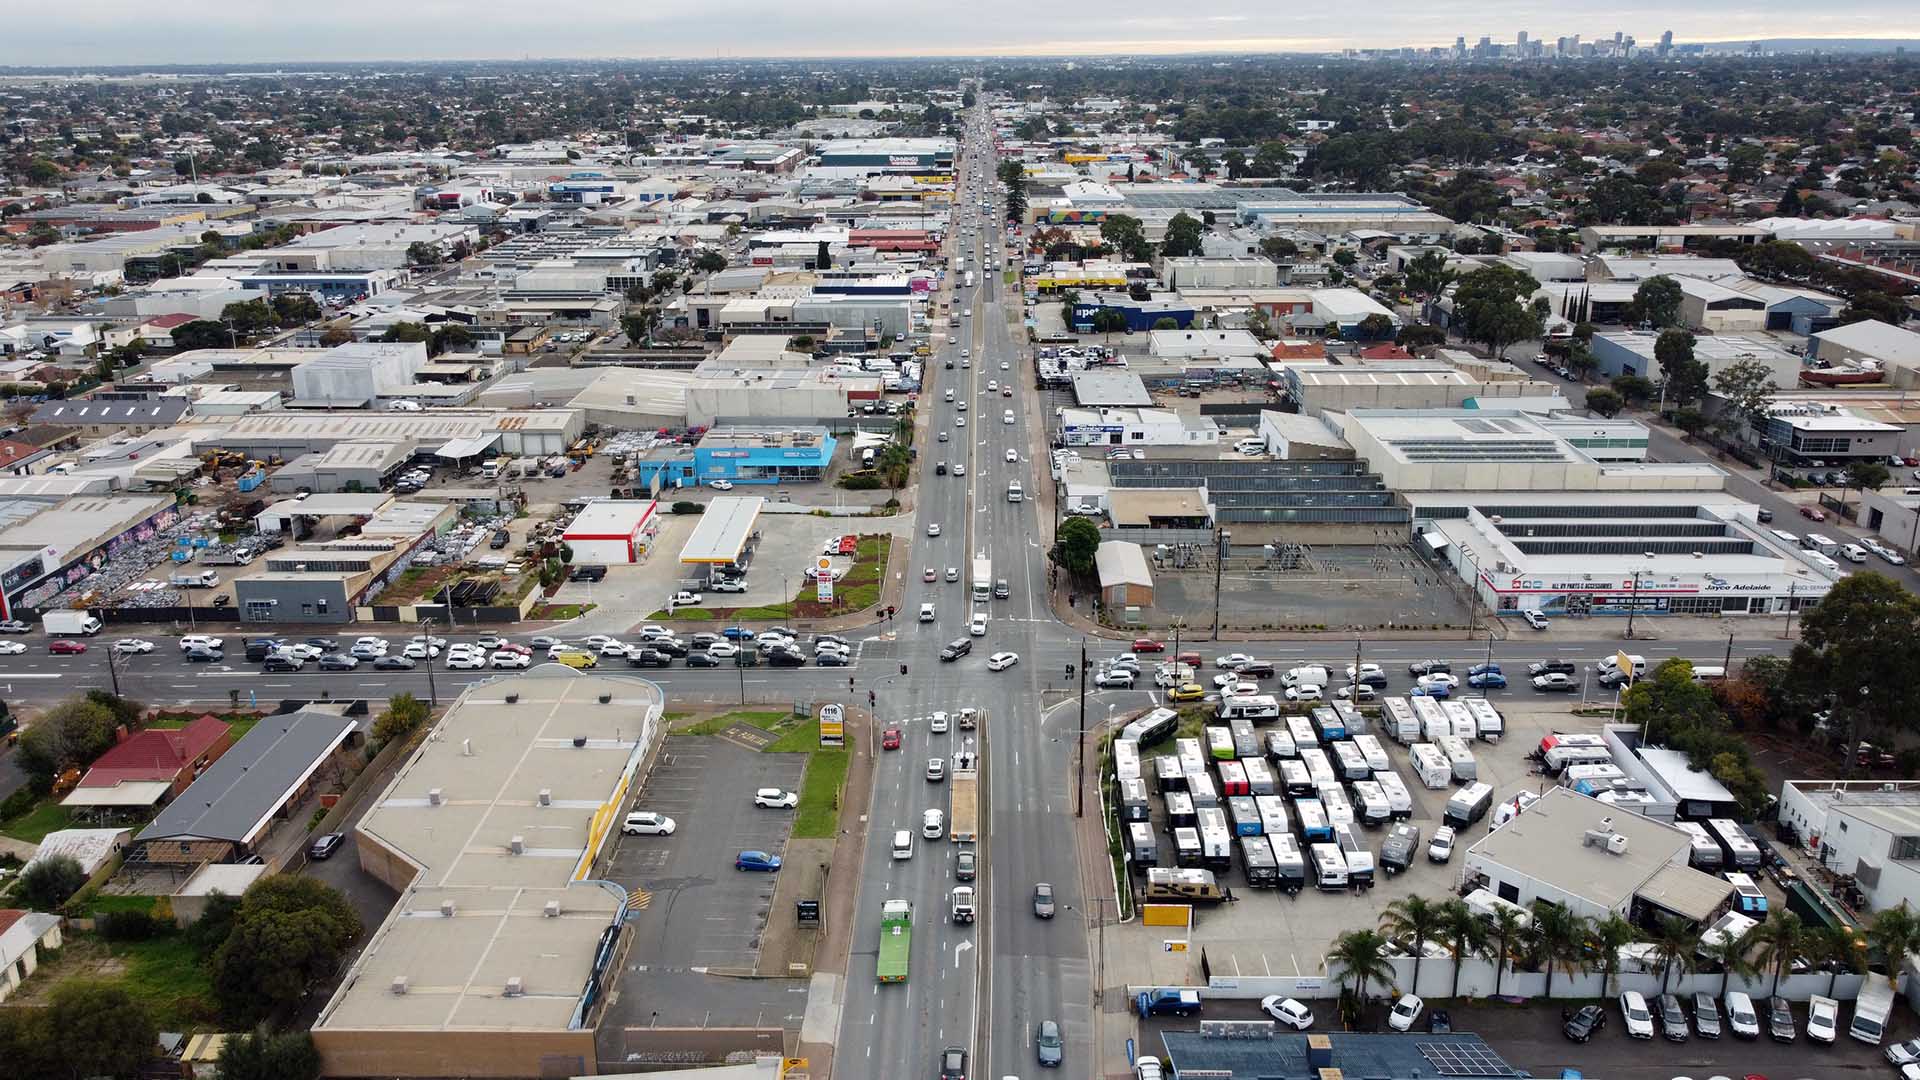 Aerial view of Daws Road / South Road intersection.